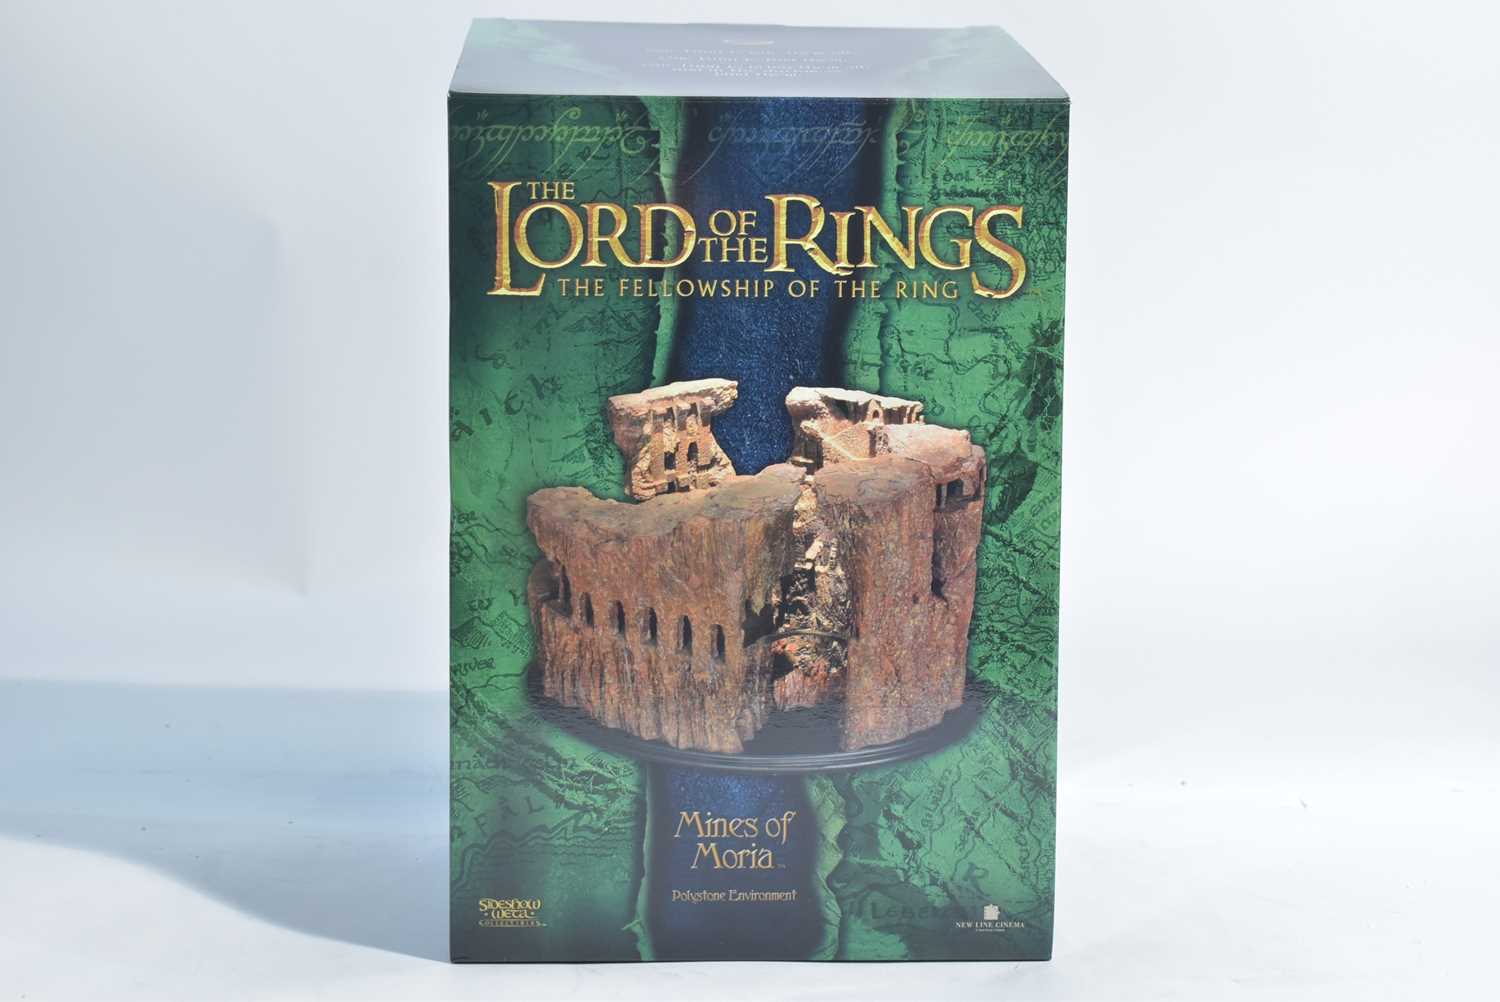 Lot 301 - Sideshow Weta Collectibles: The Lord of the Rings, Mines of Moria polystone environment